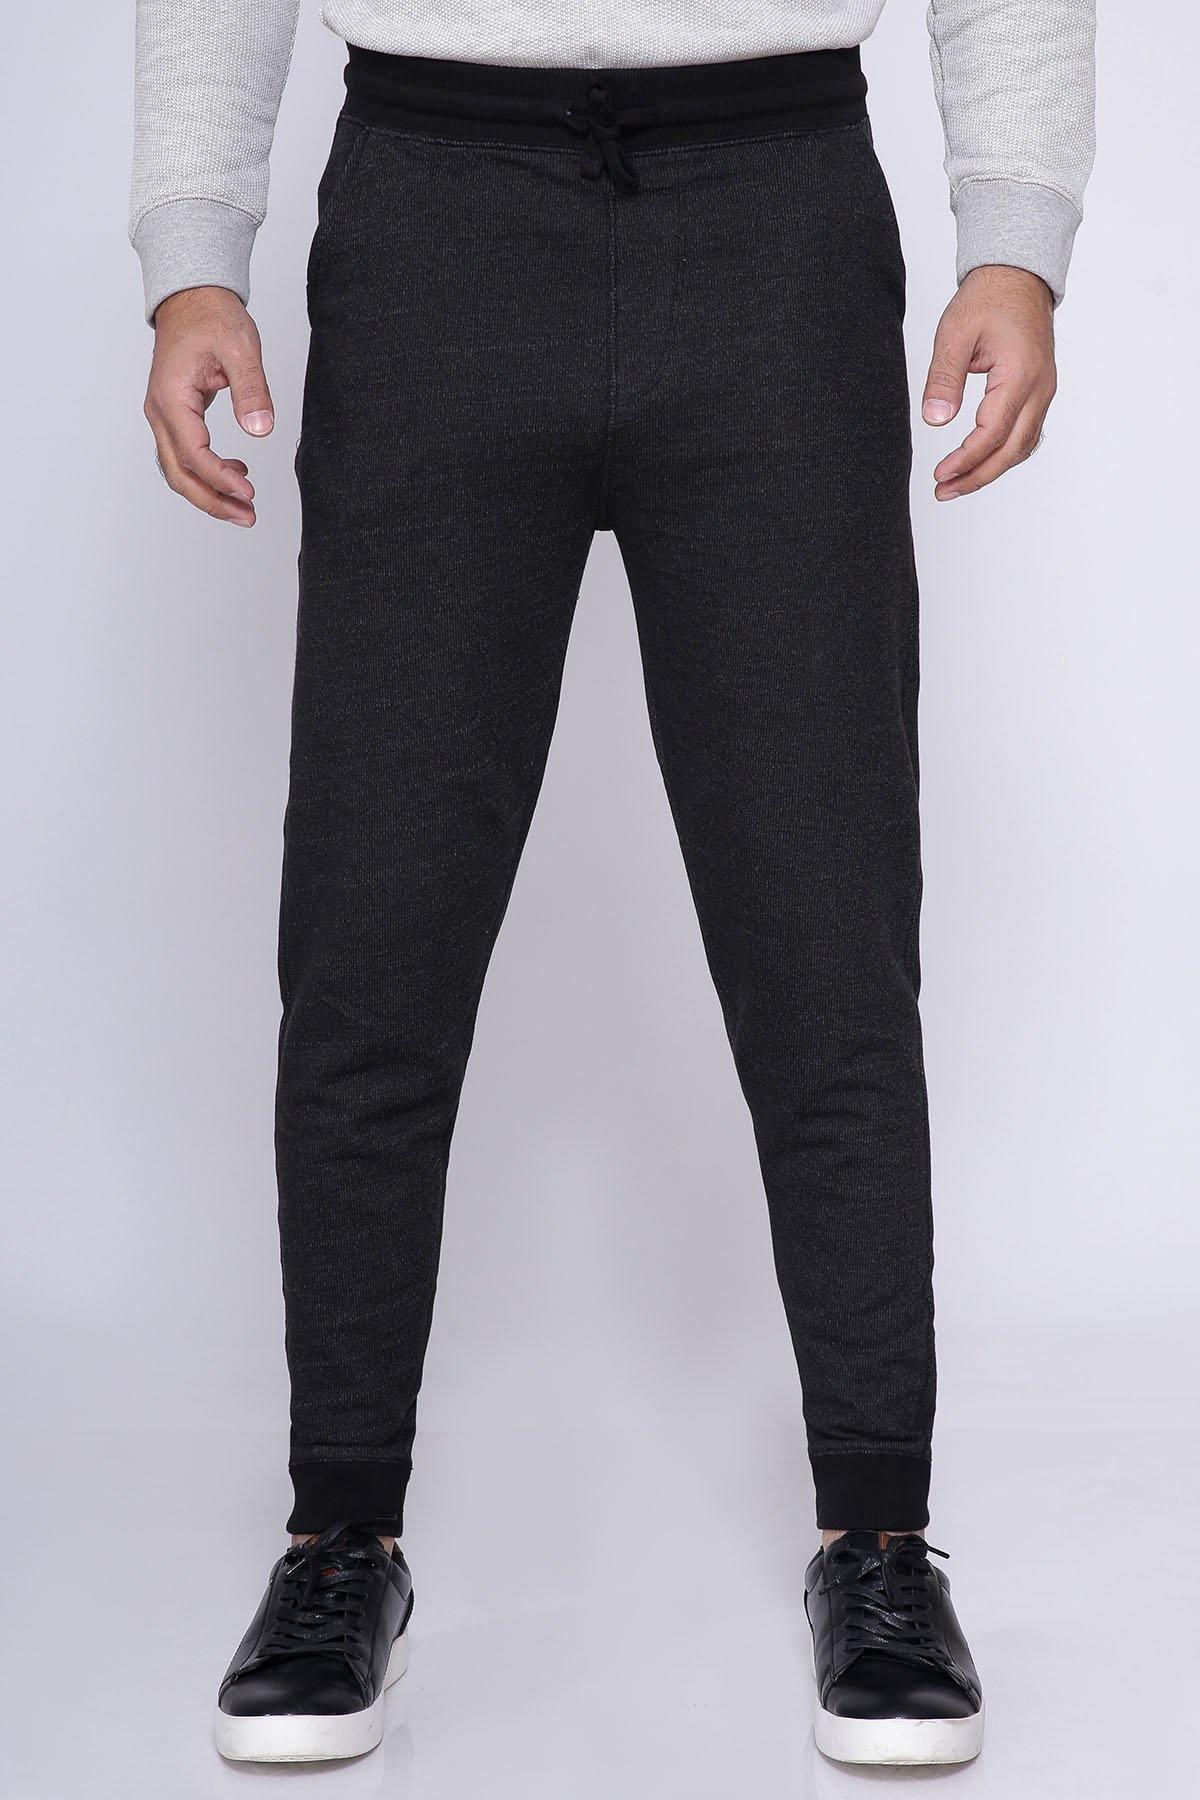 CHAIN YARN TROUSER BLACK at Charcoal Clothing